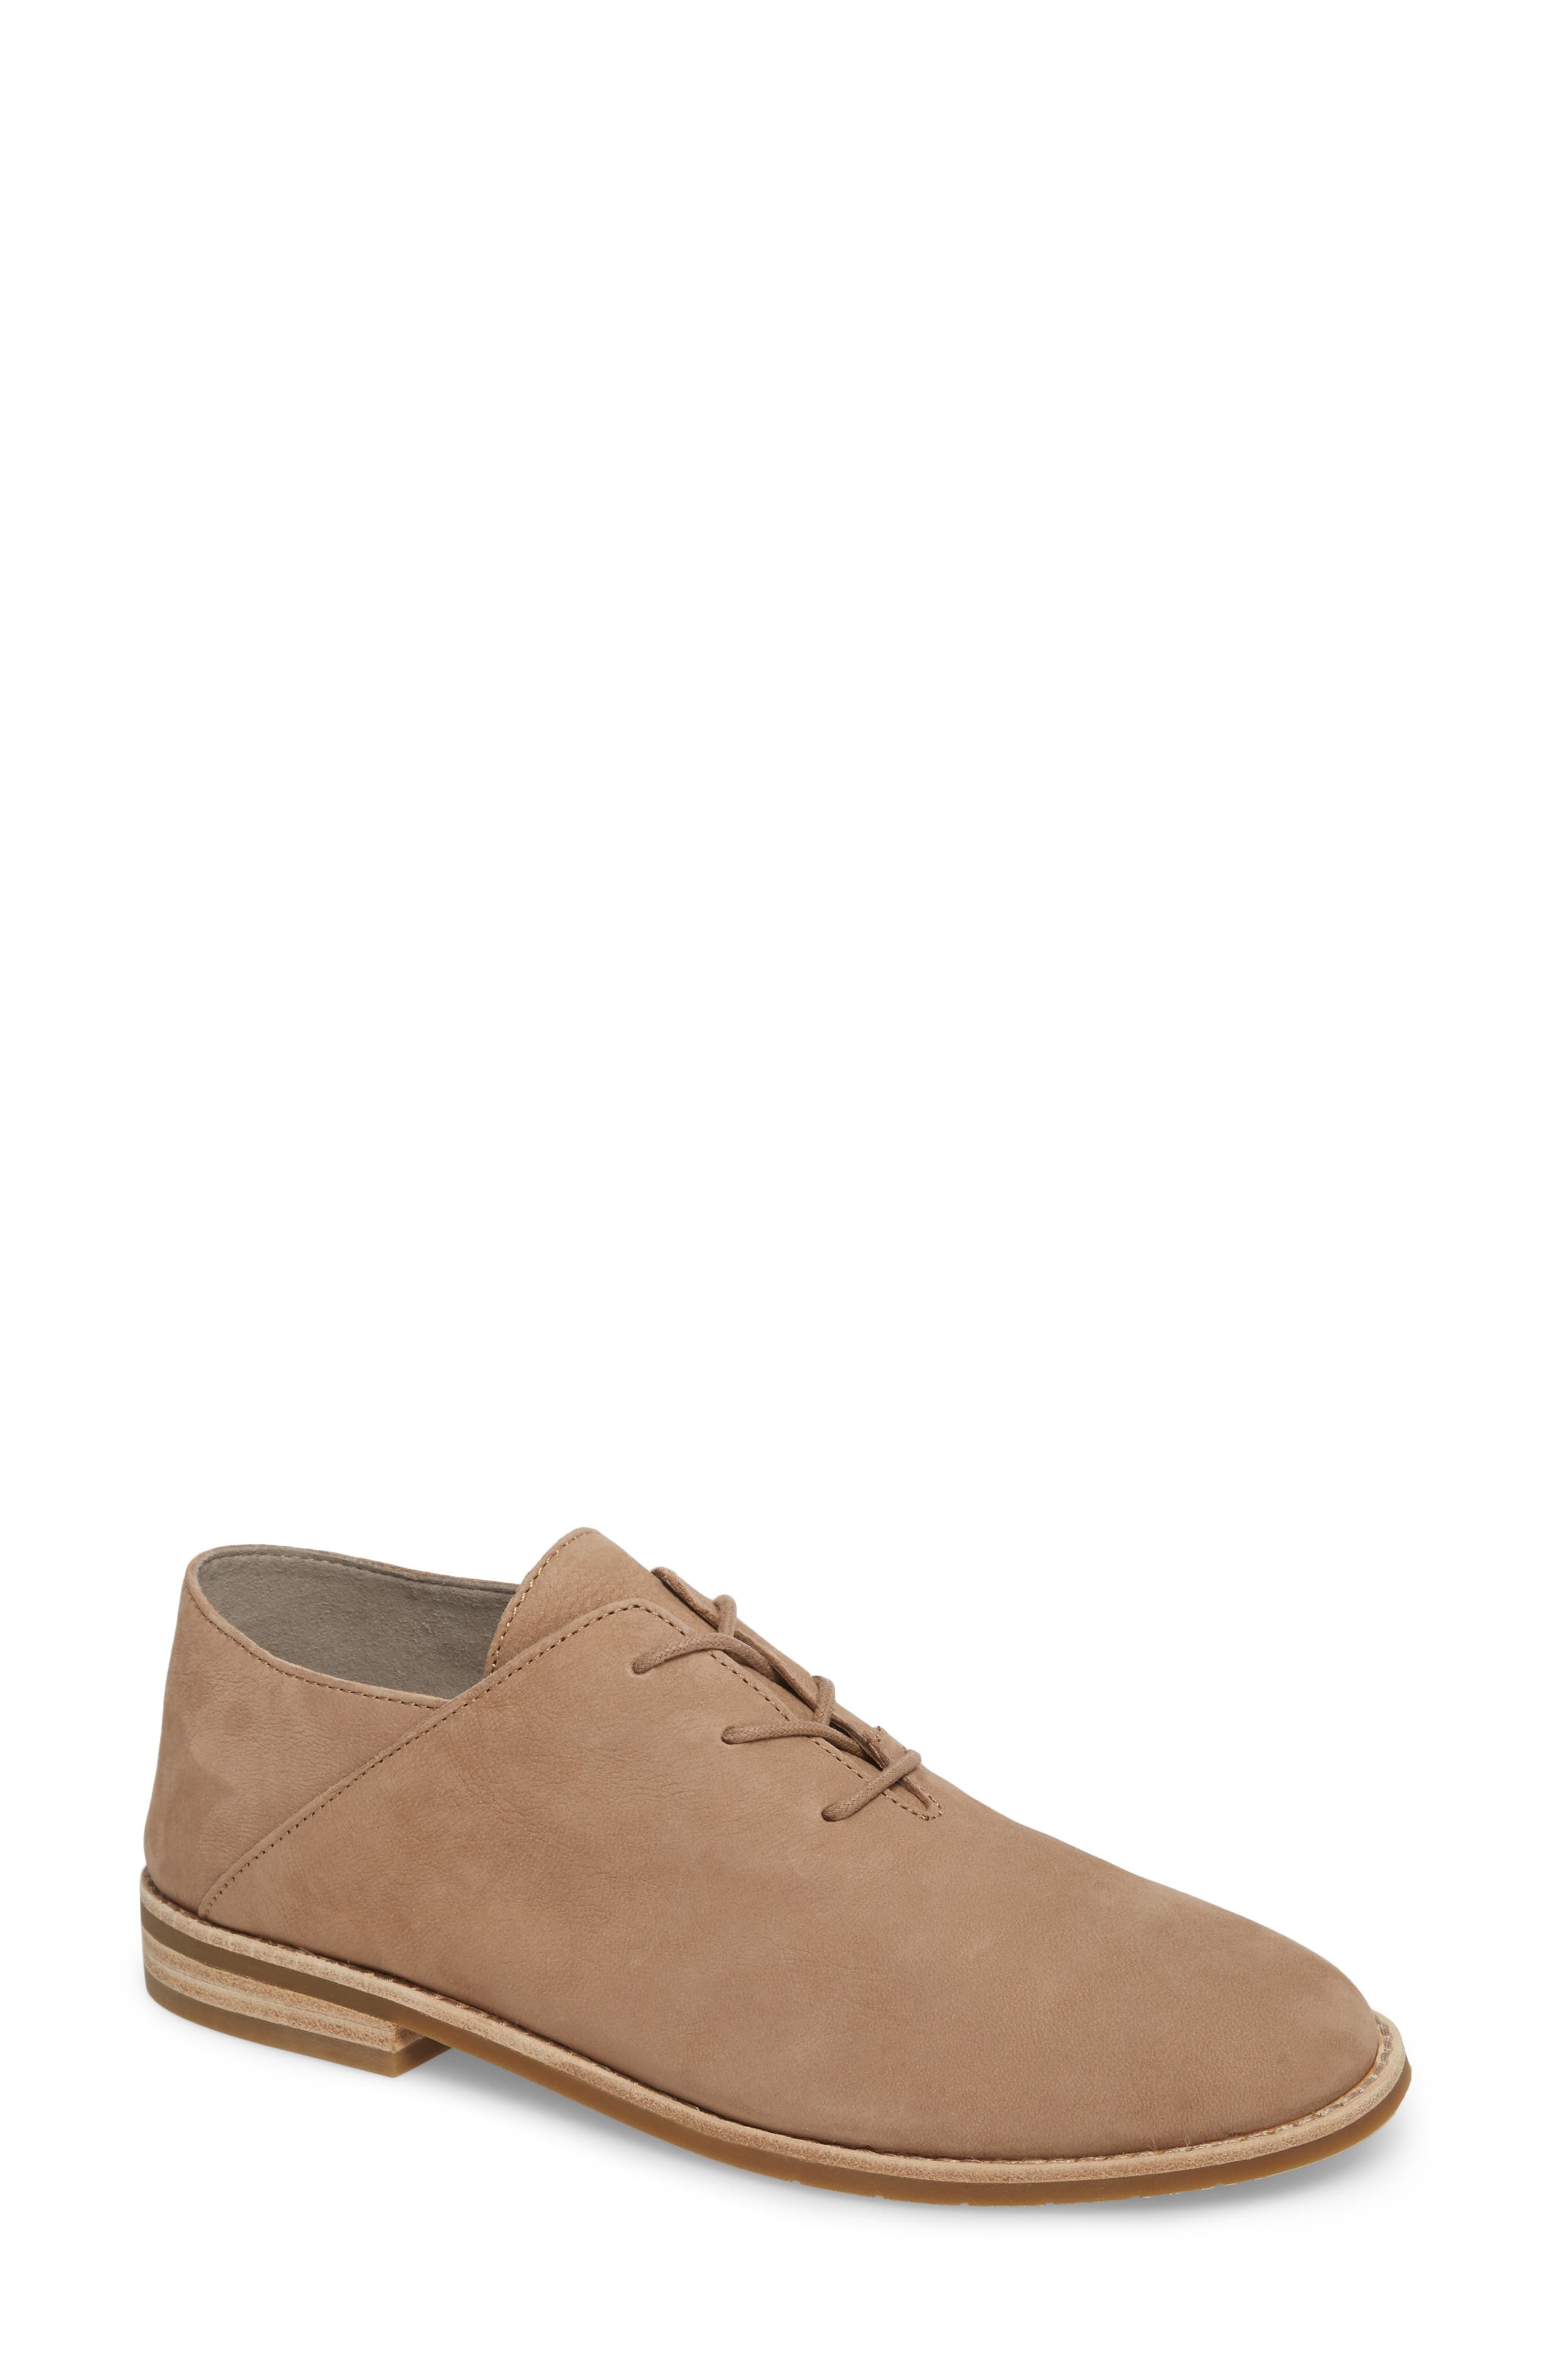 eileen fisher oxford shoes